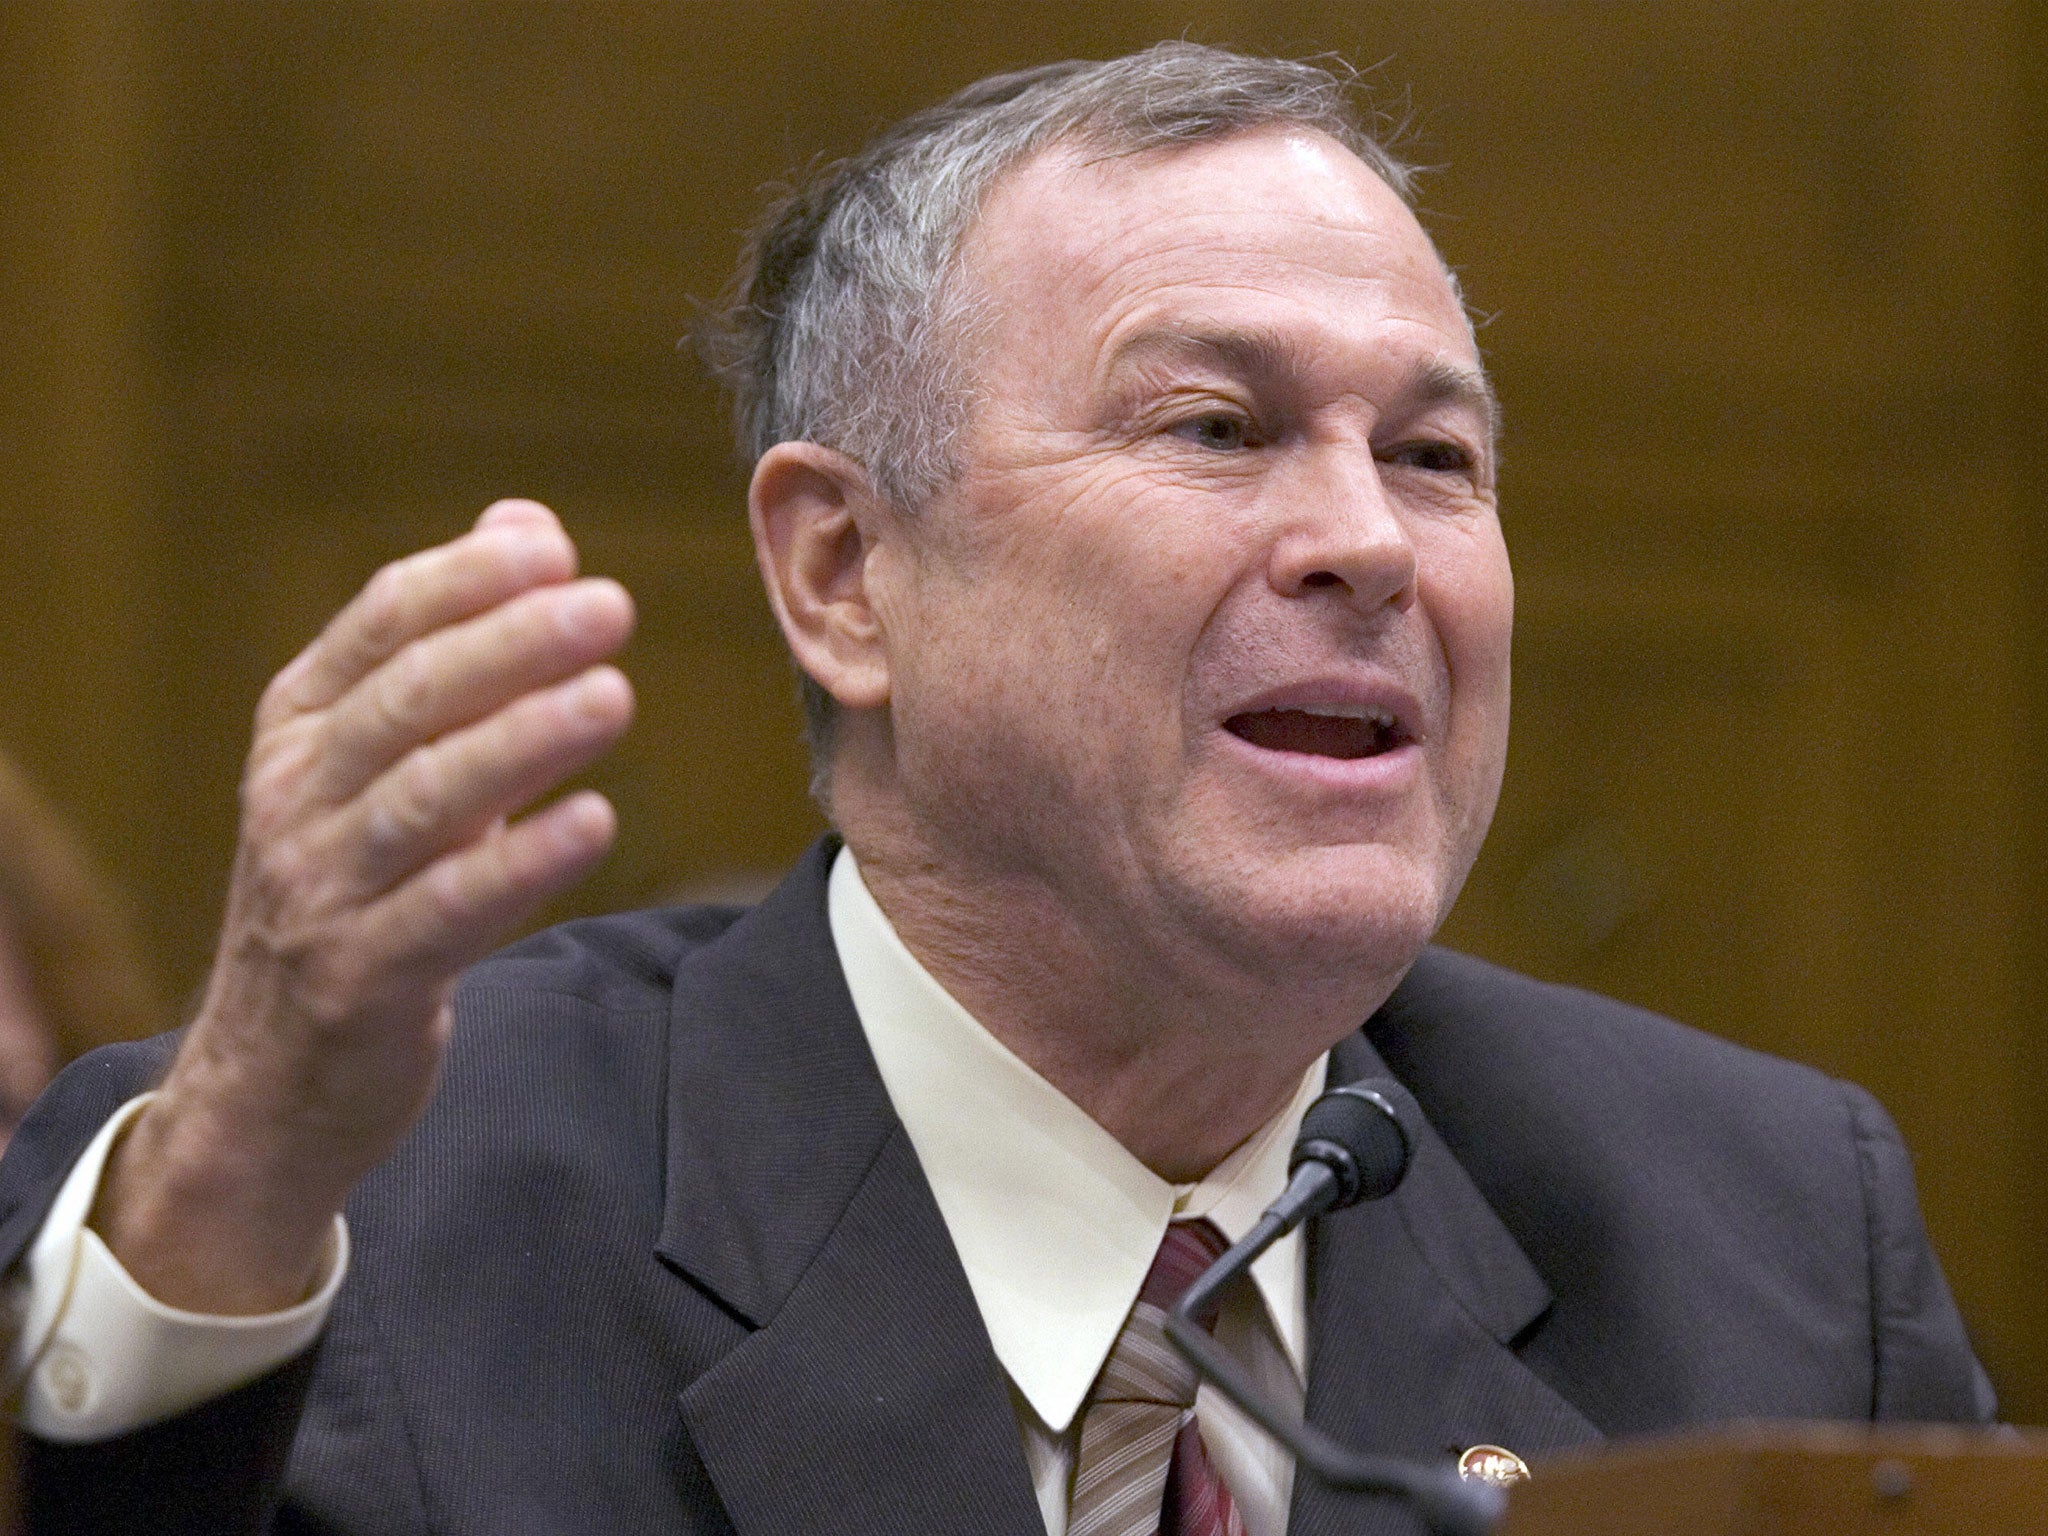 The Republican Congressman addressed a group of property developers last week